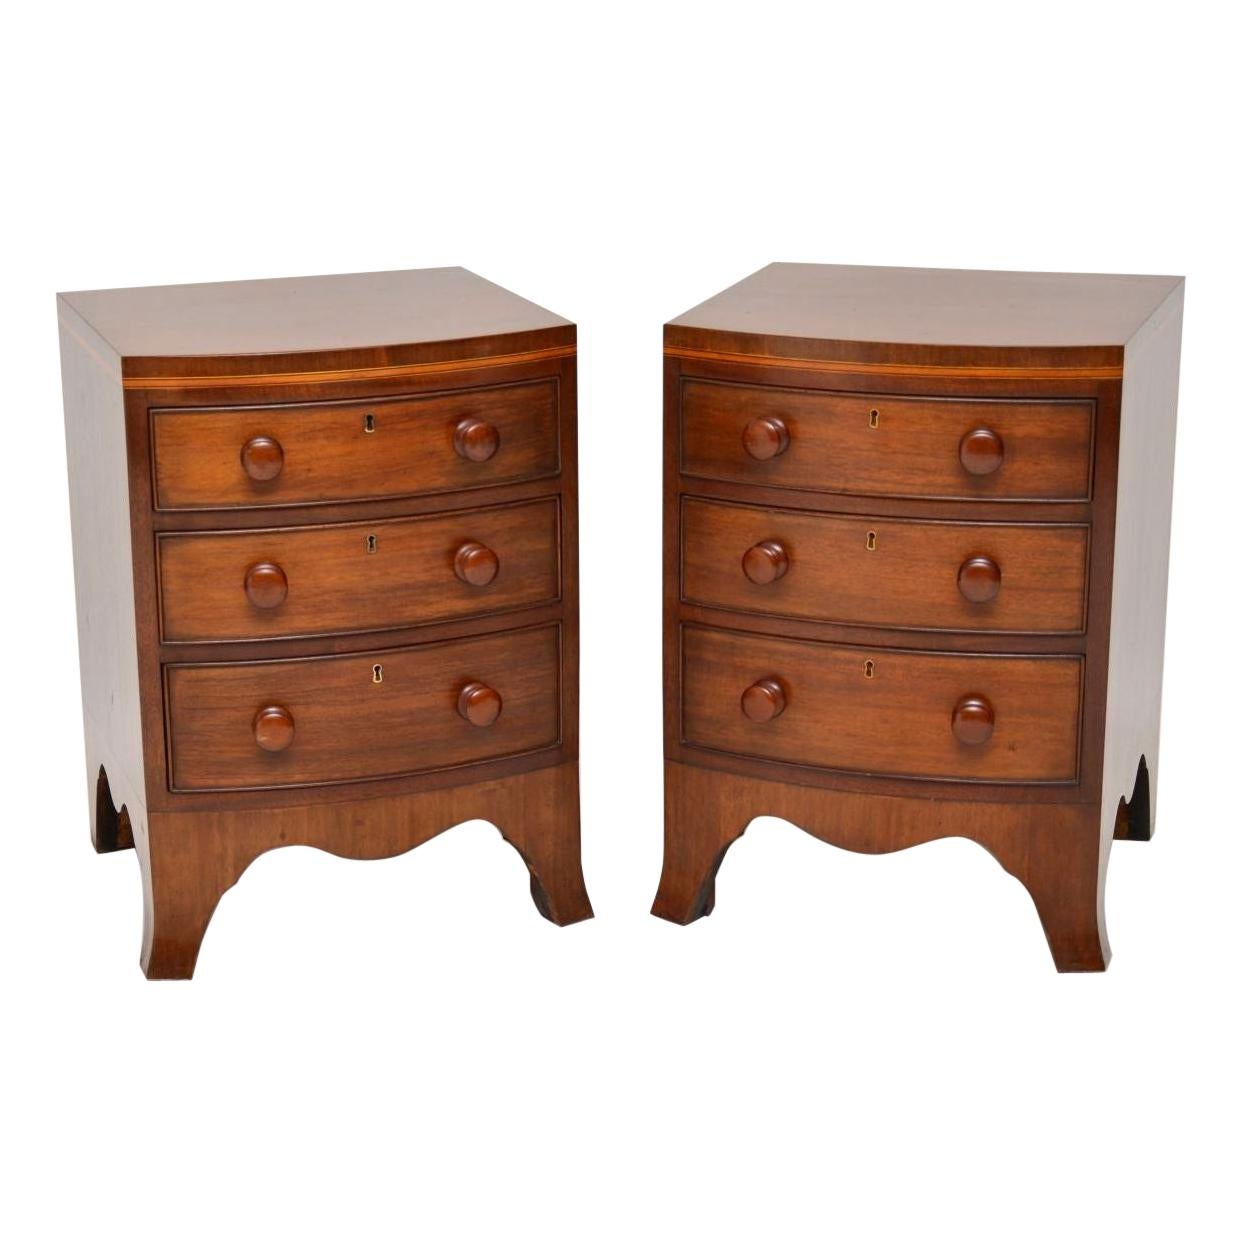 Pair of Antique Georgian Style Mahogany Bedside Chests